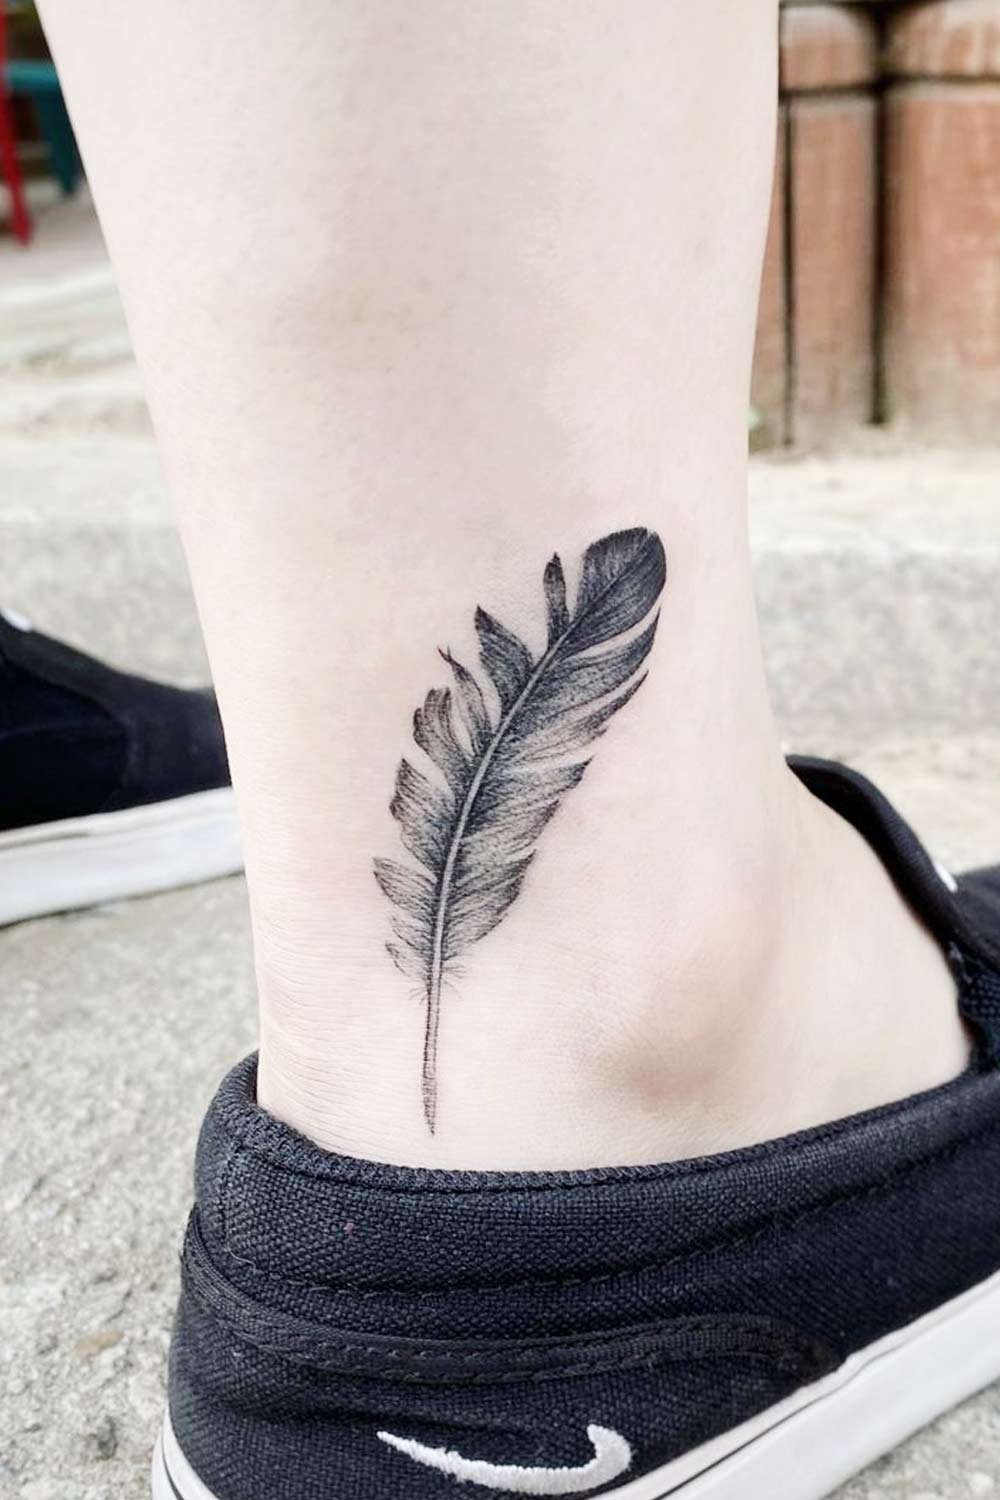 Feather Tattoos in Bangkok - All Day Tattoo